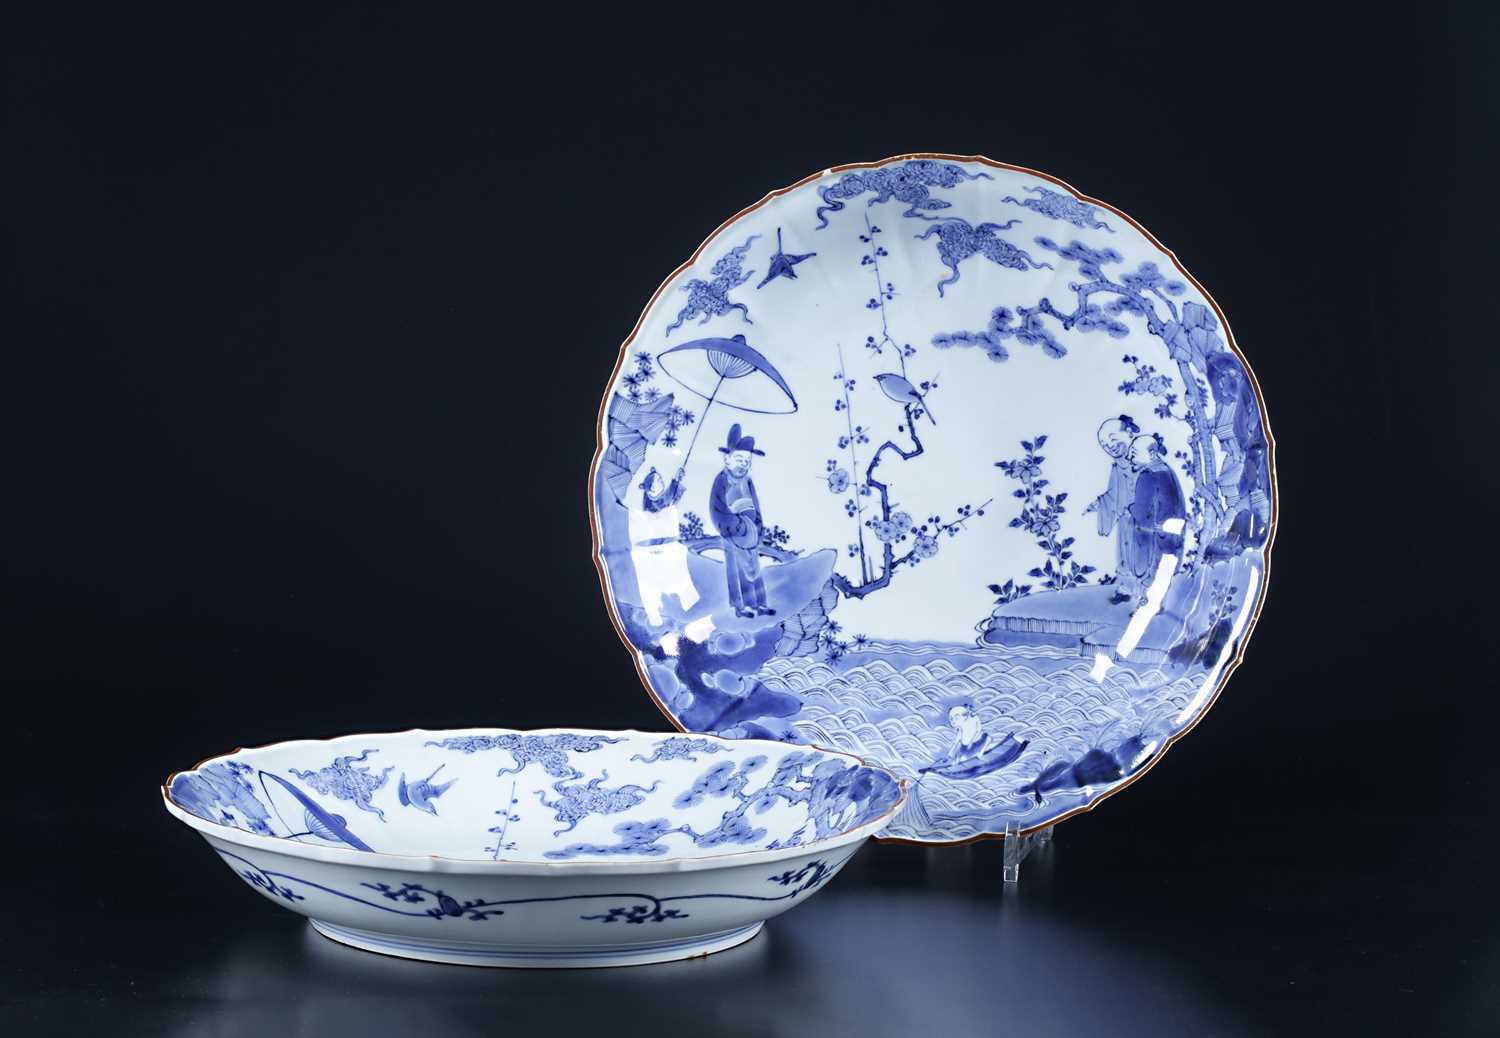 Lot 82 - A Pair of Kakiemon Blue and White Dishes, Late 17th Century